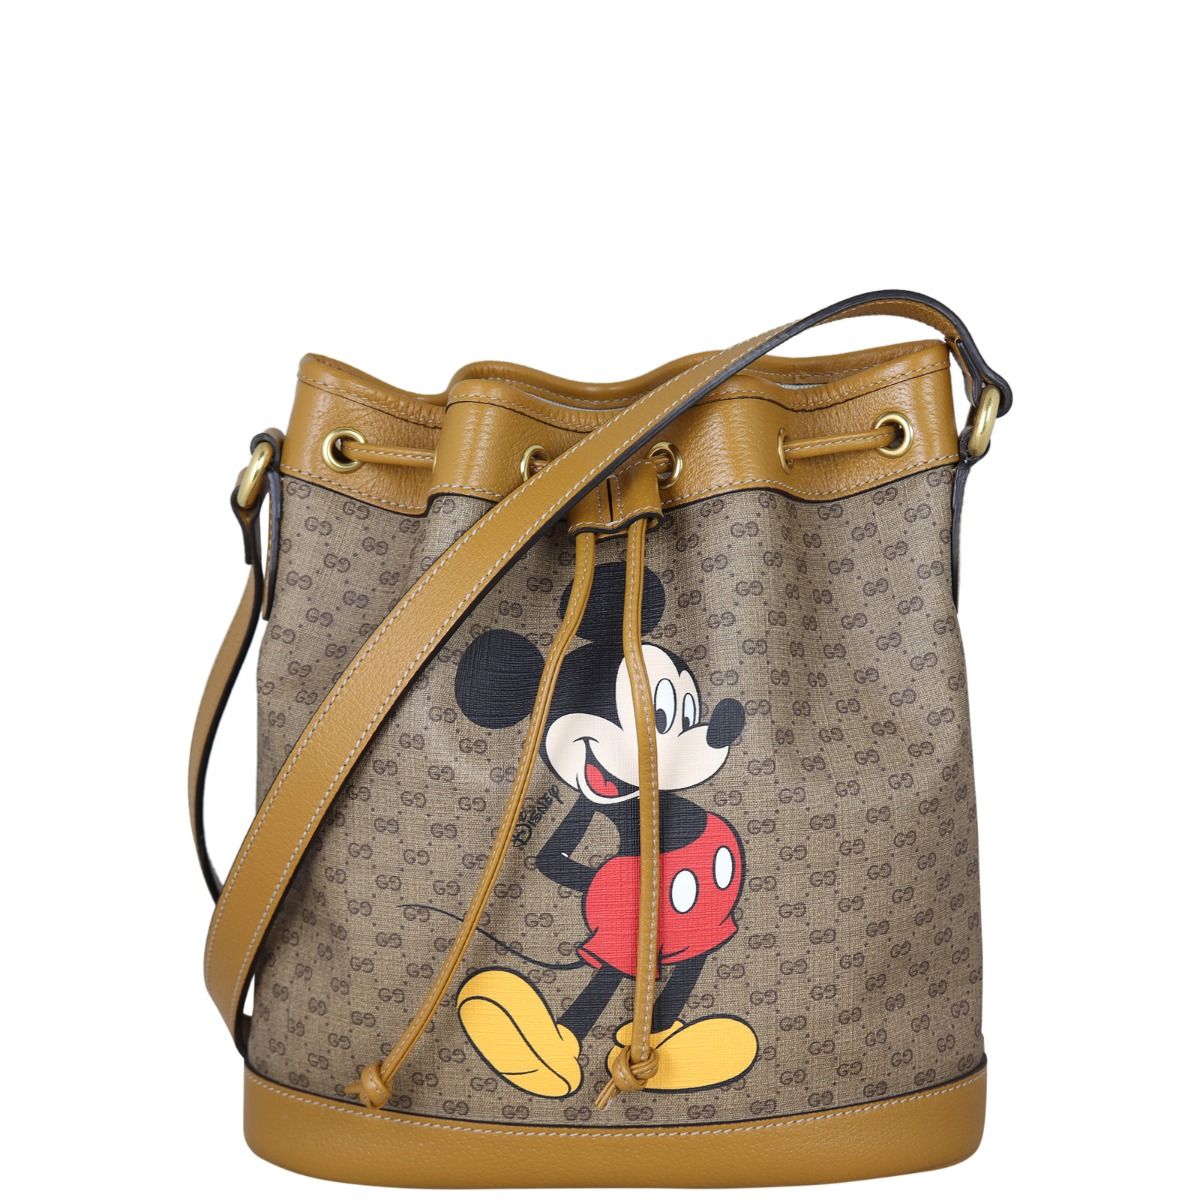 Gucci x Disney Mickey Mouse Print Canvas Leather Bucket Shoulder Bag